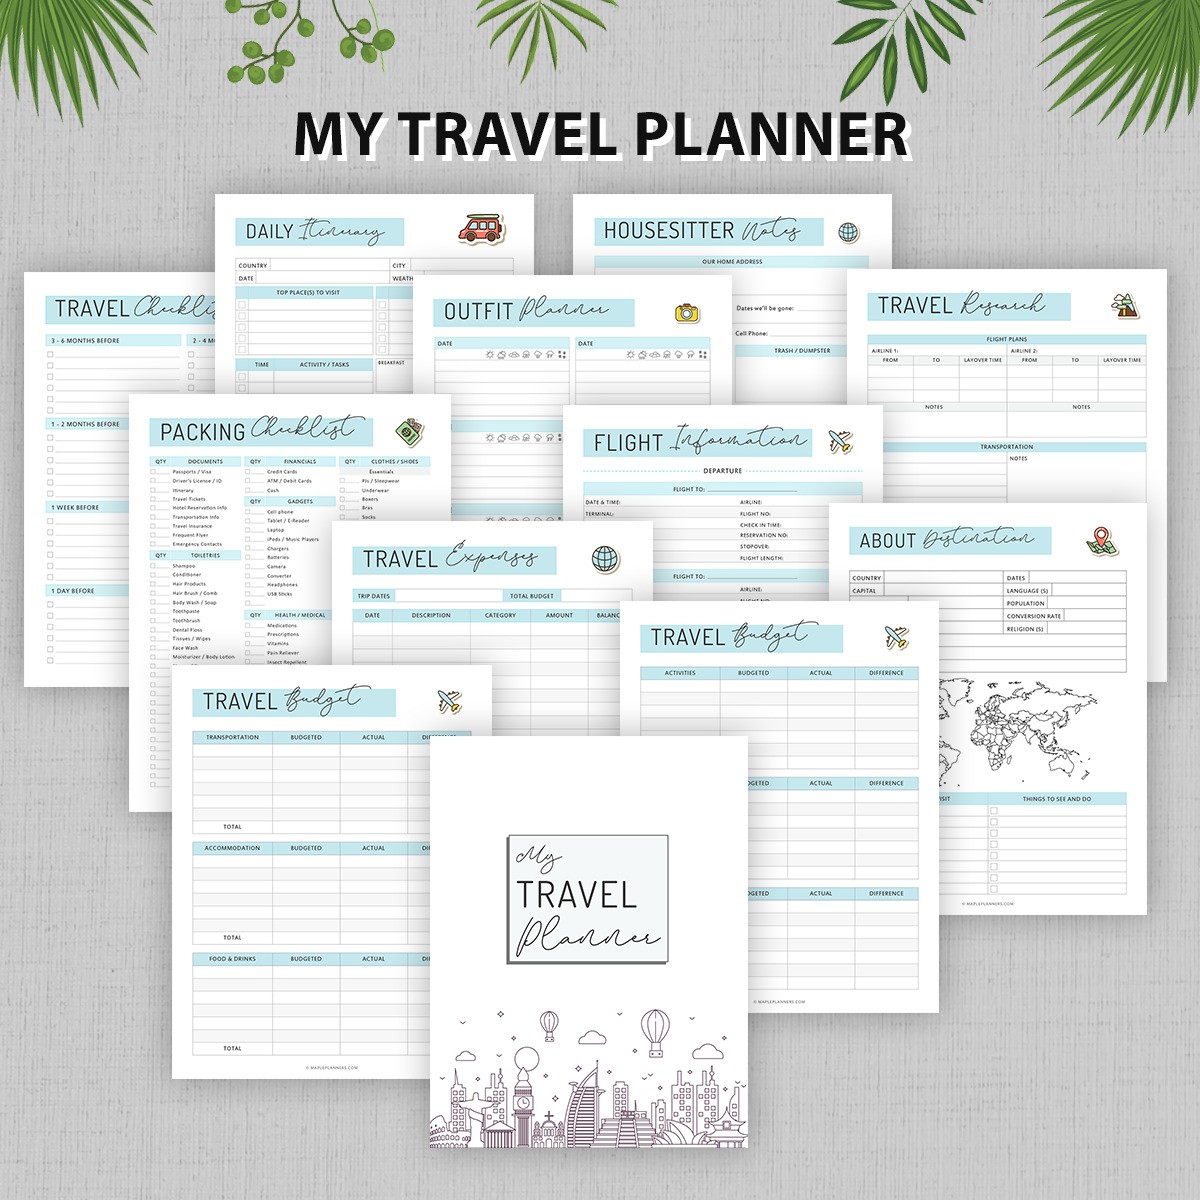 Packing Checklist for Vacation Printable